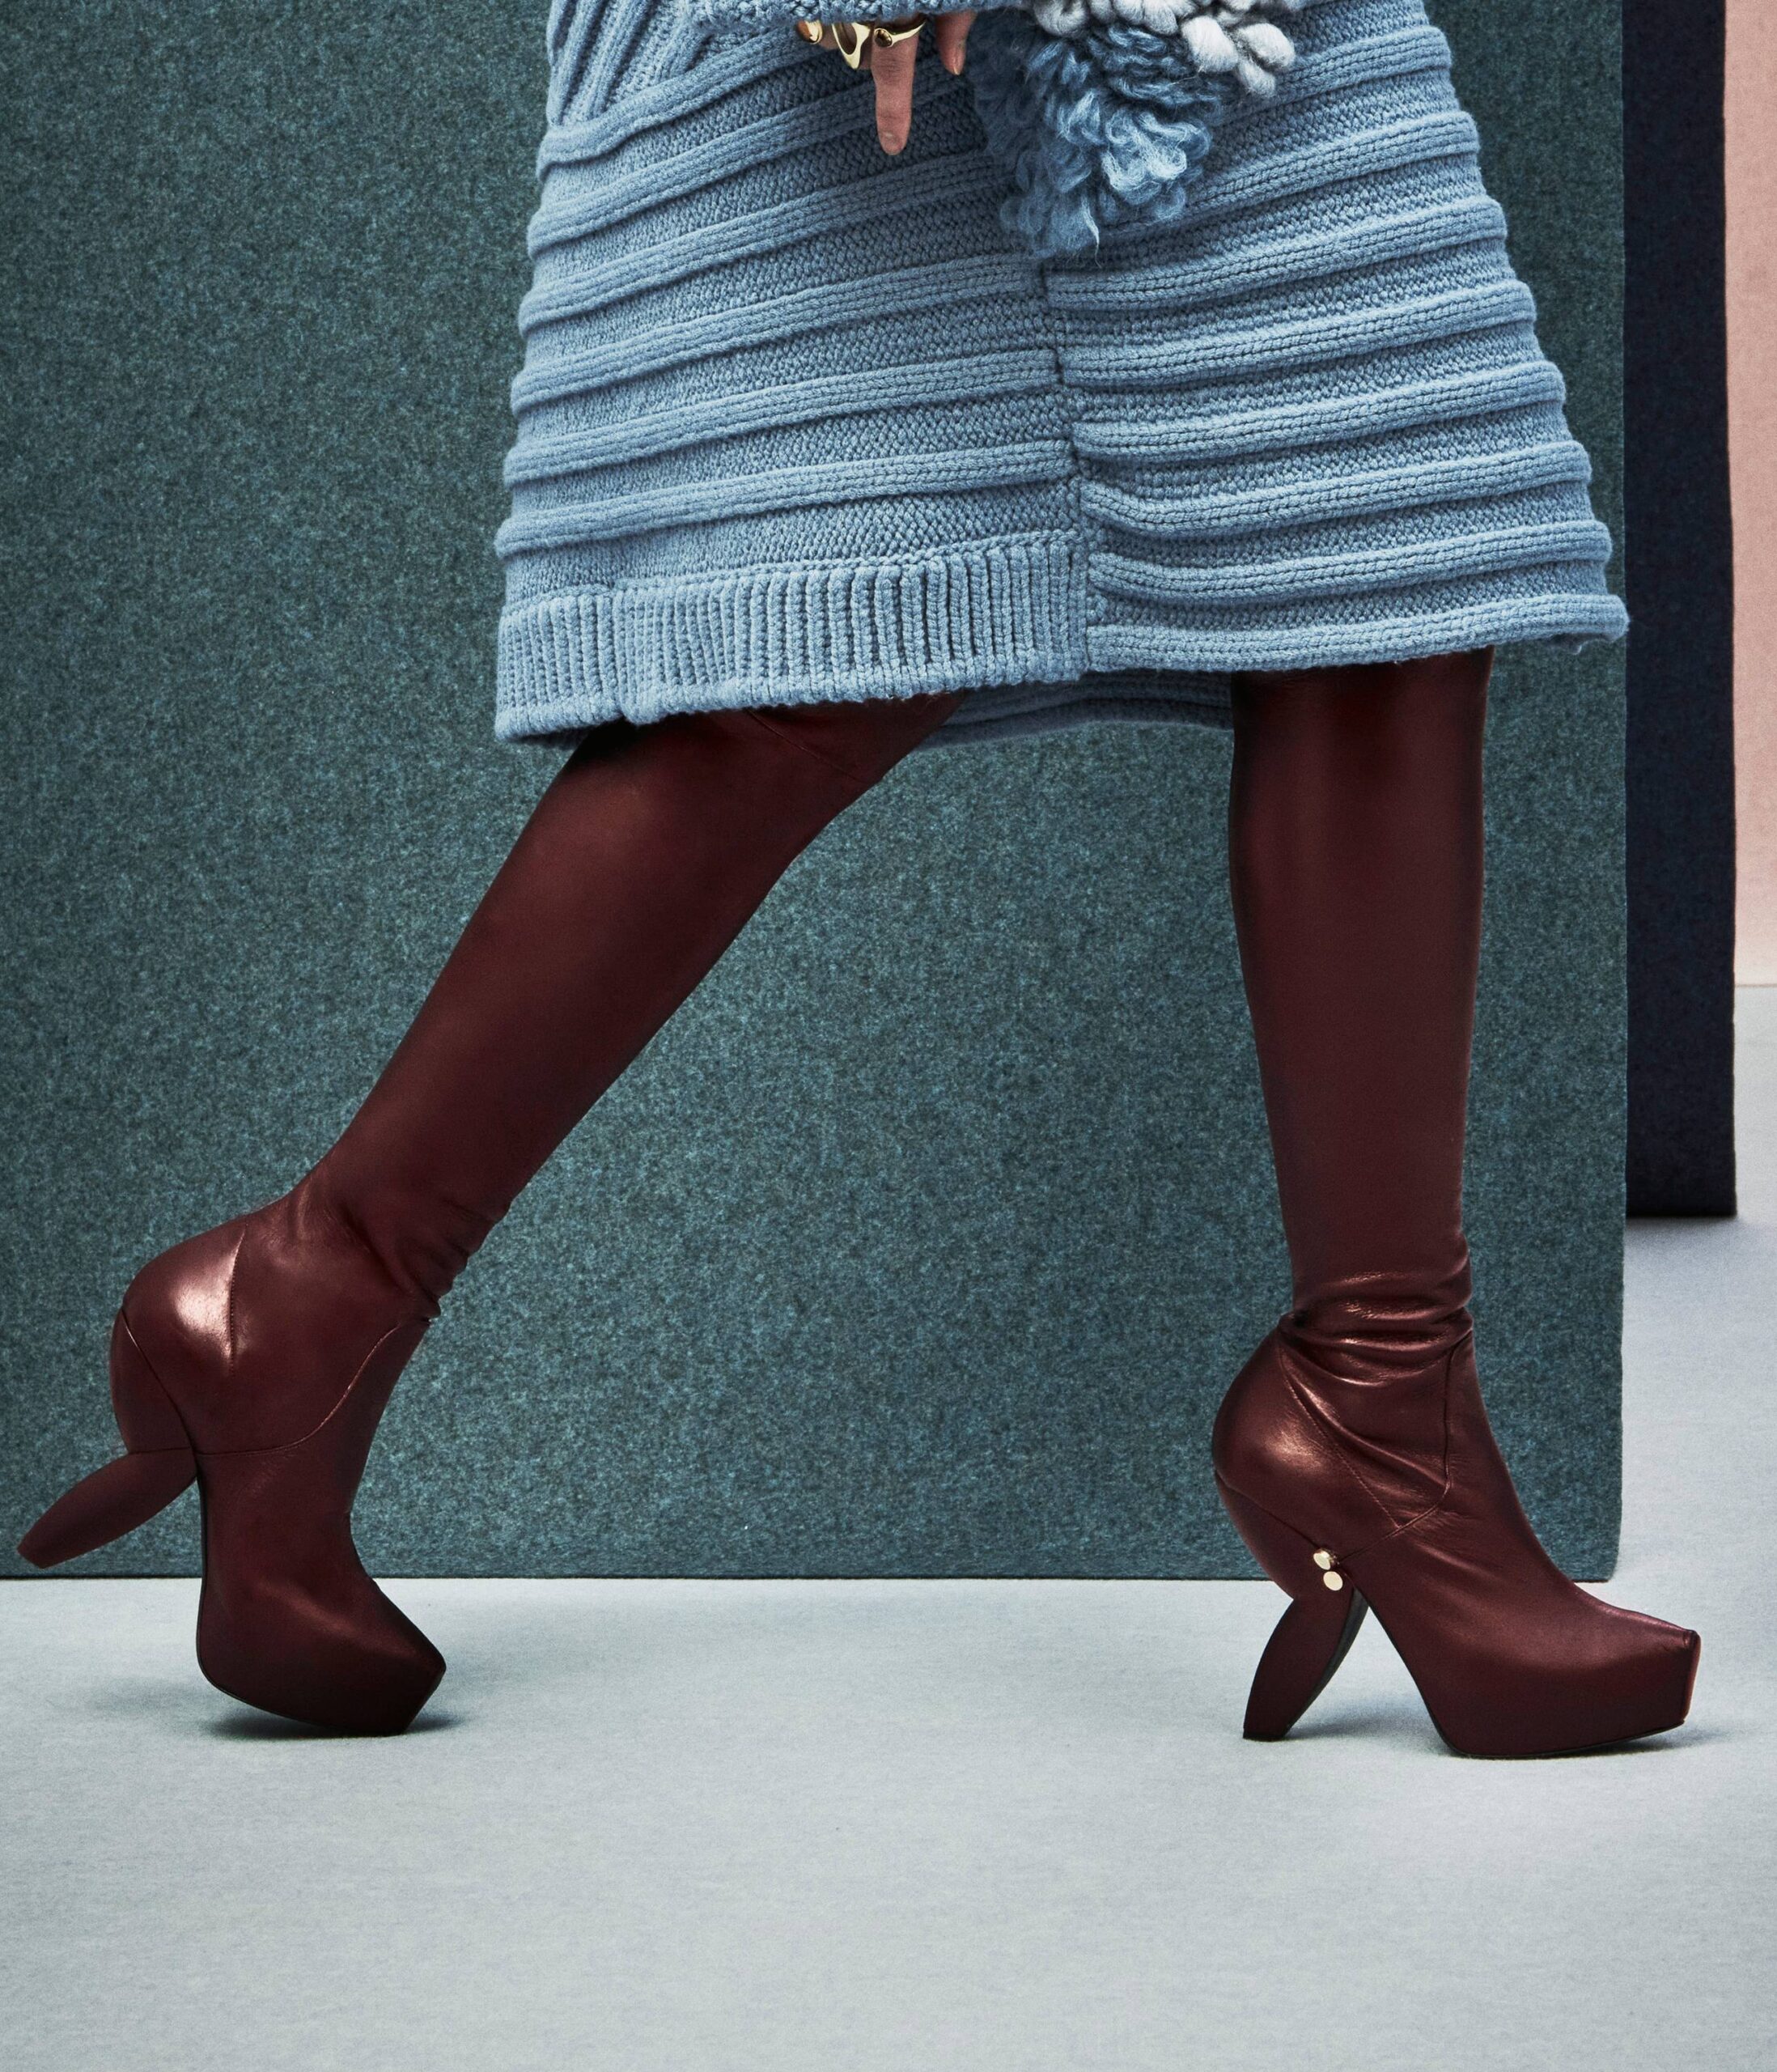 17-pairs-of-platform-boots-to-stomp-around-in-this-fall